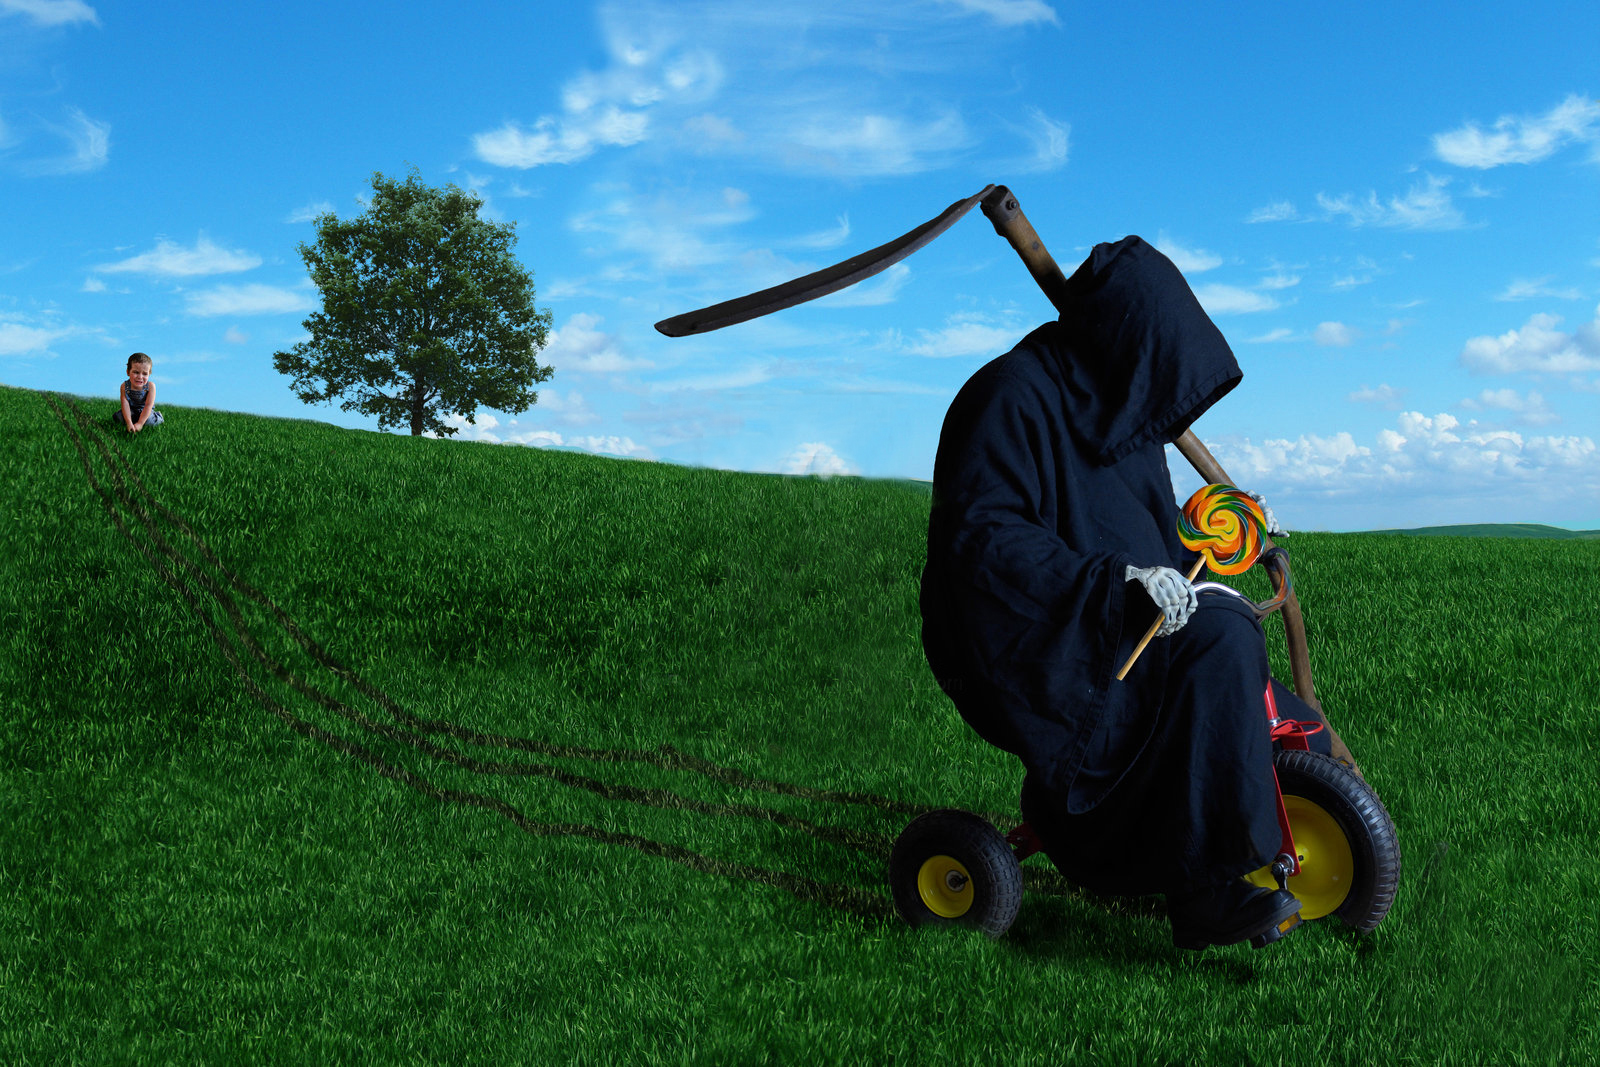 Grim Reaper Stolen Baby Bicycle And Candy Funny Image